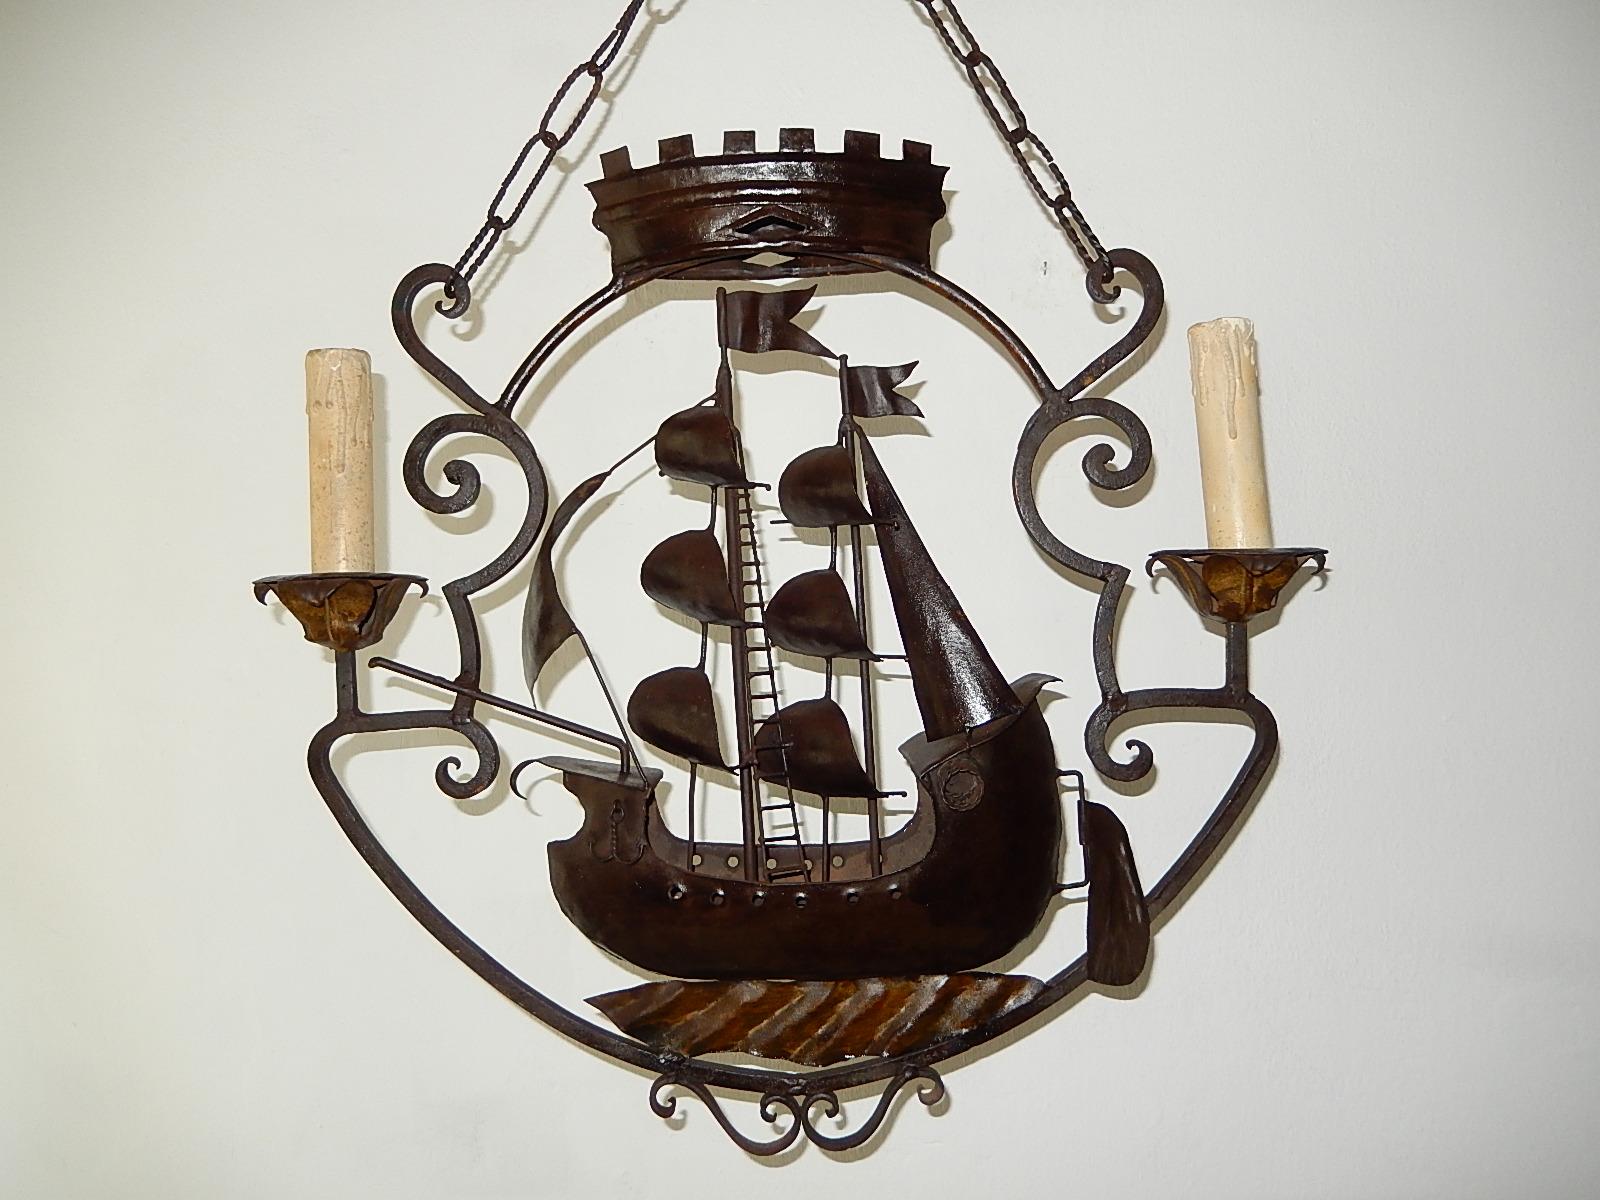 Huge wrought iron ship. Housing two-light. Will be rewired with appropriate sockets for country and ready to hang. Incredible details. Crown, flags, sails, rudder, latter, anchors, ropes and water. Original chains as well. Free priority UPS shipping